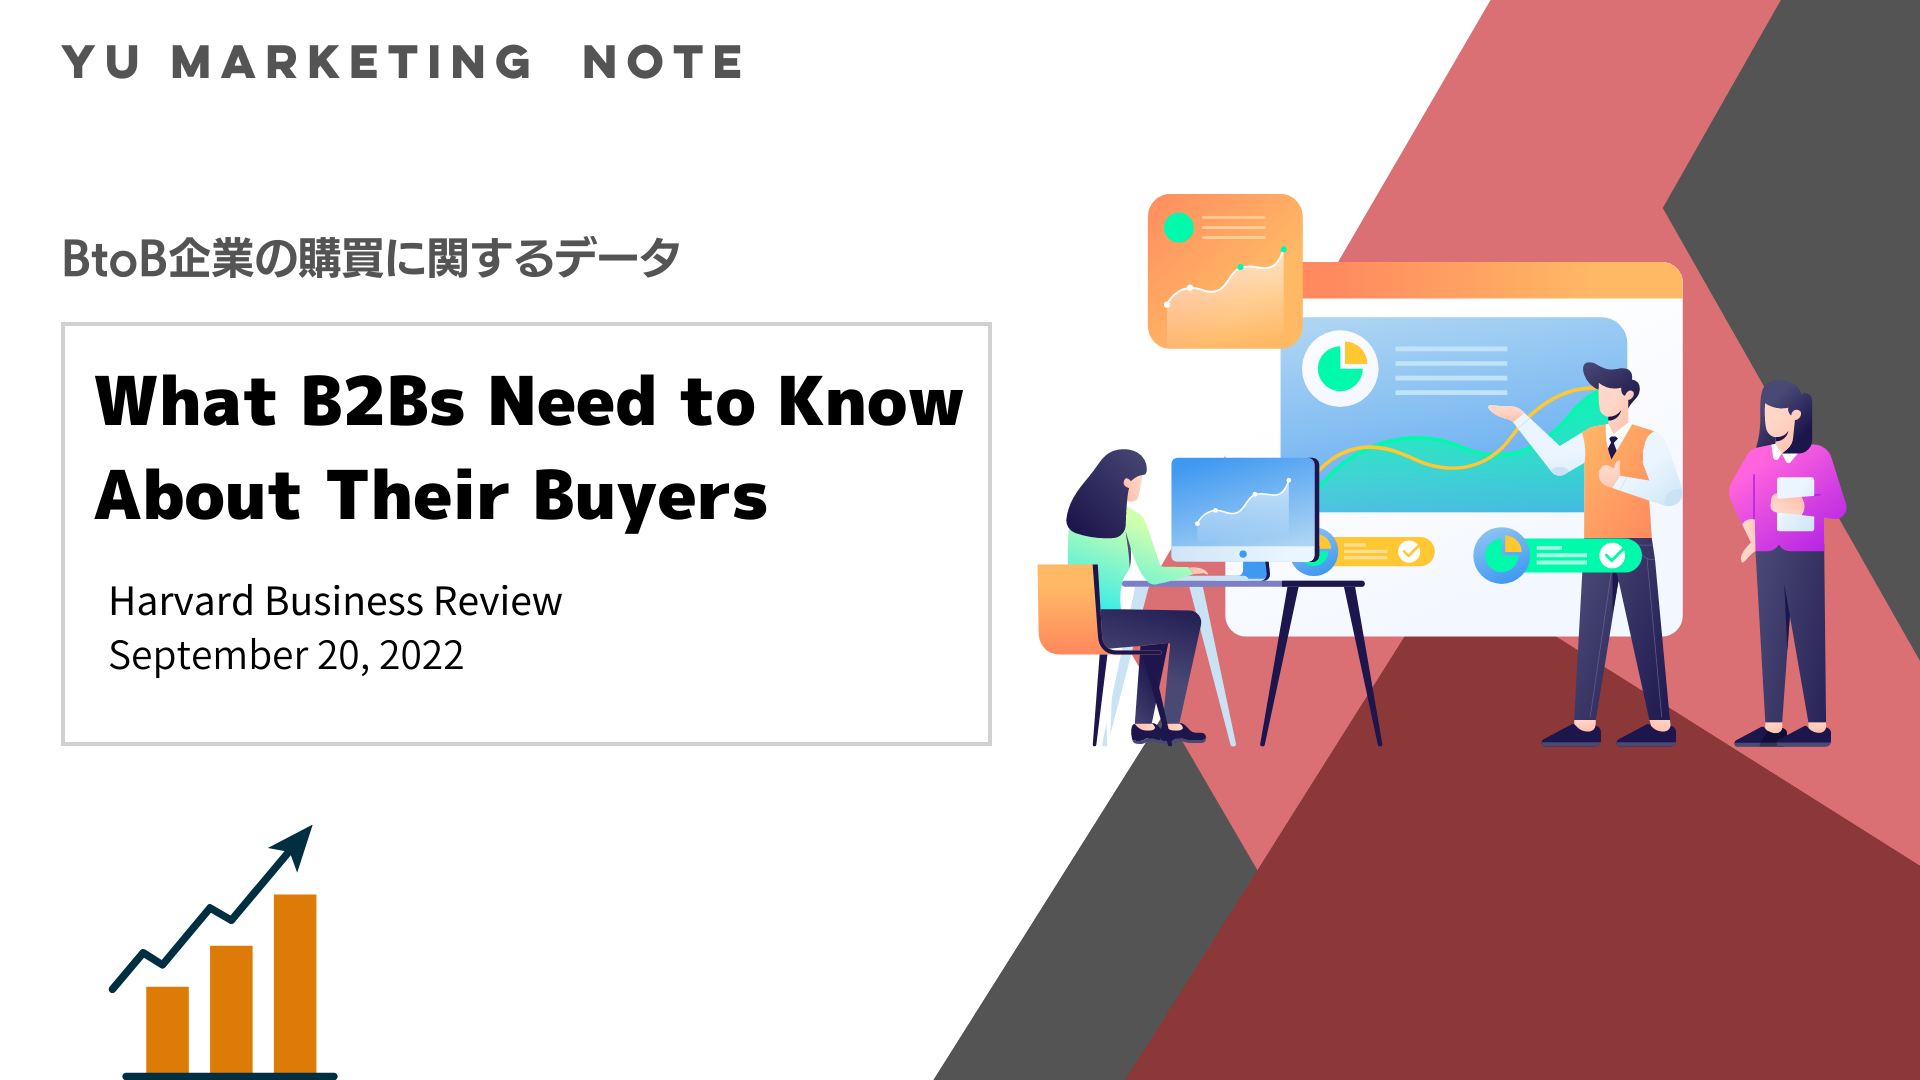 What B2Bs Need to Know About Their Buyers